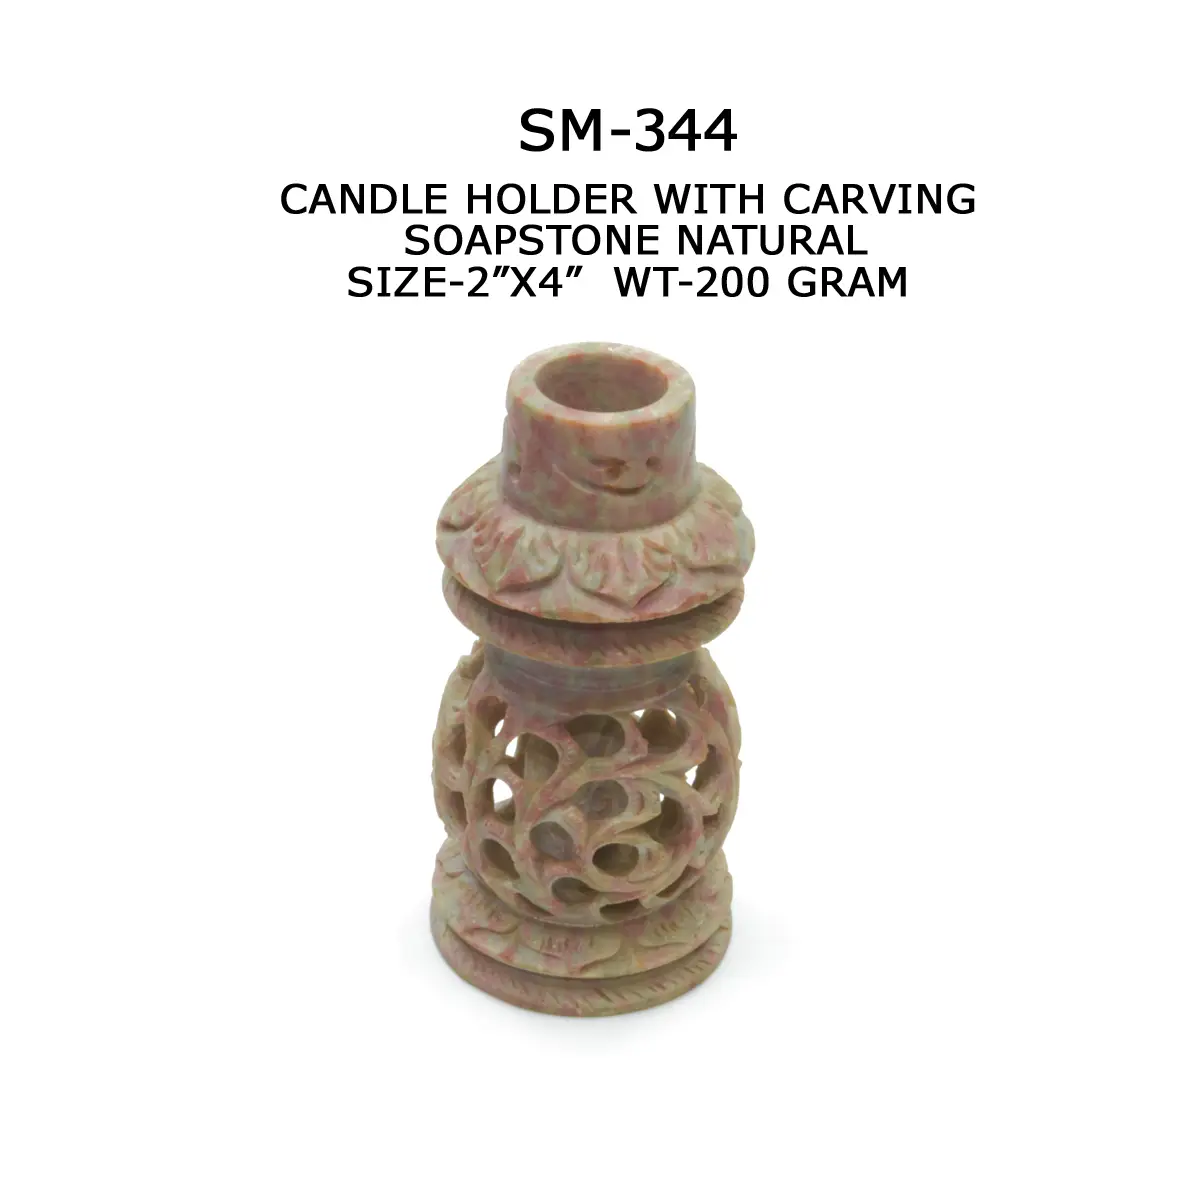 CANDLE HOLDER WITH CARVING SOAPSTONE